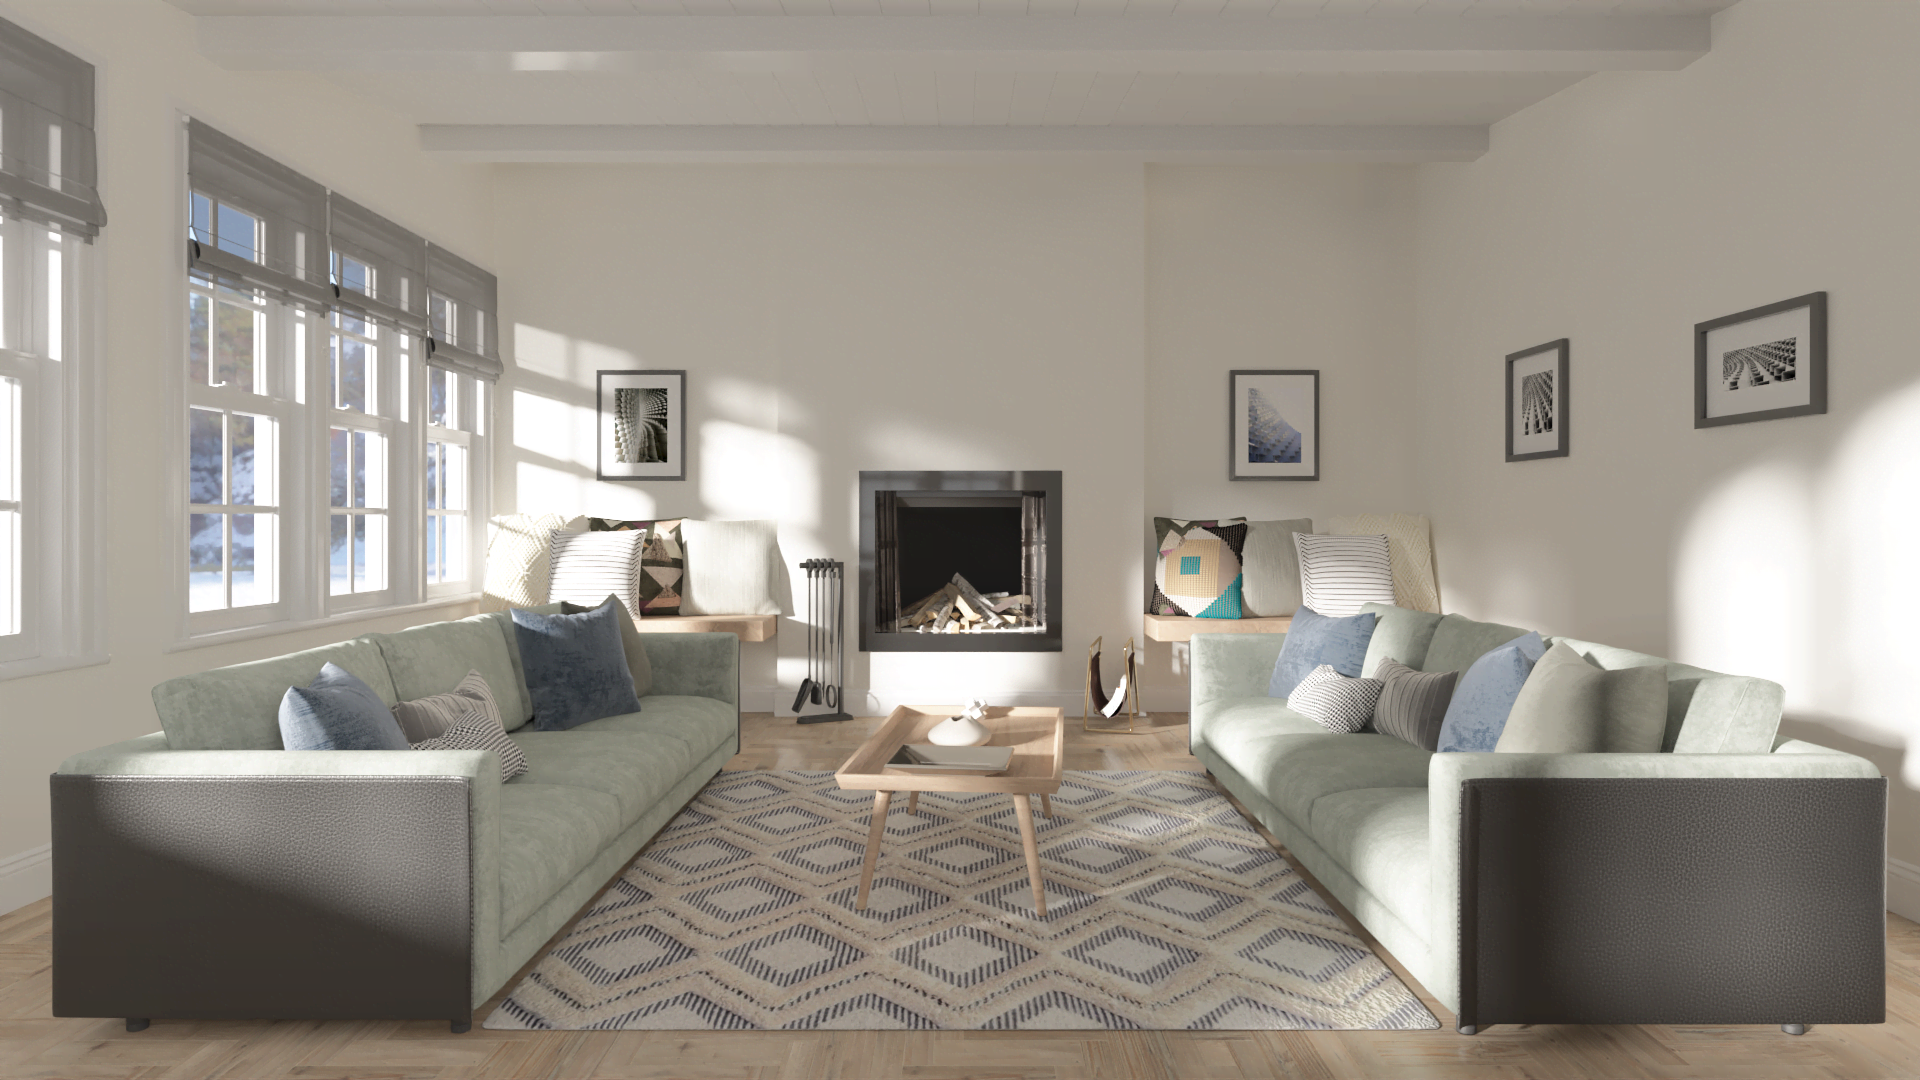 Living room with grey furniture and chevron-patterned rug with walls painted in Valspar's "Swiss Coffee" paint.